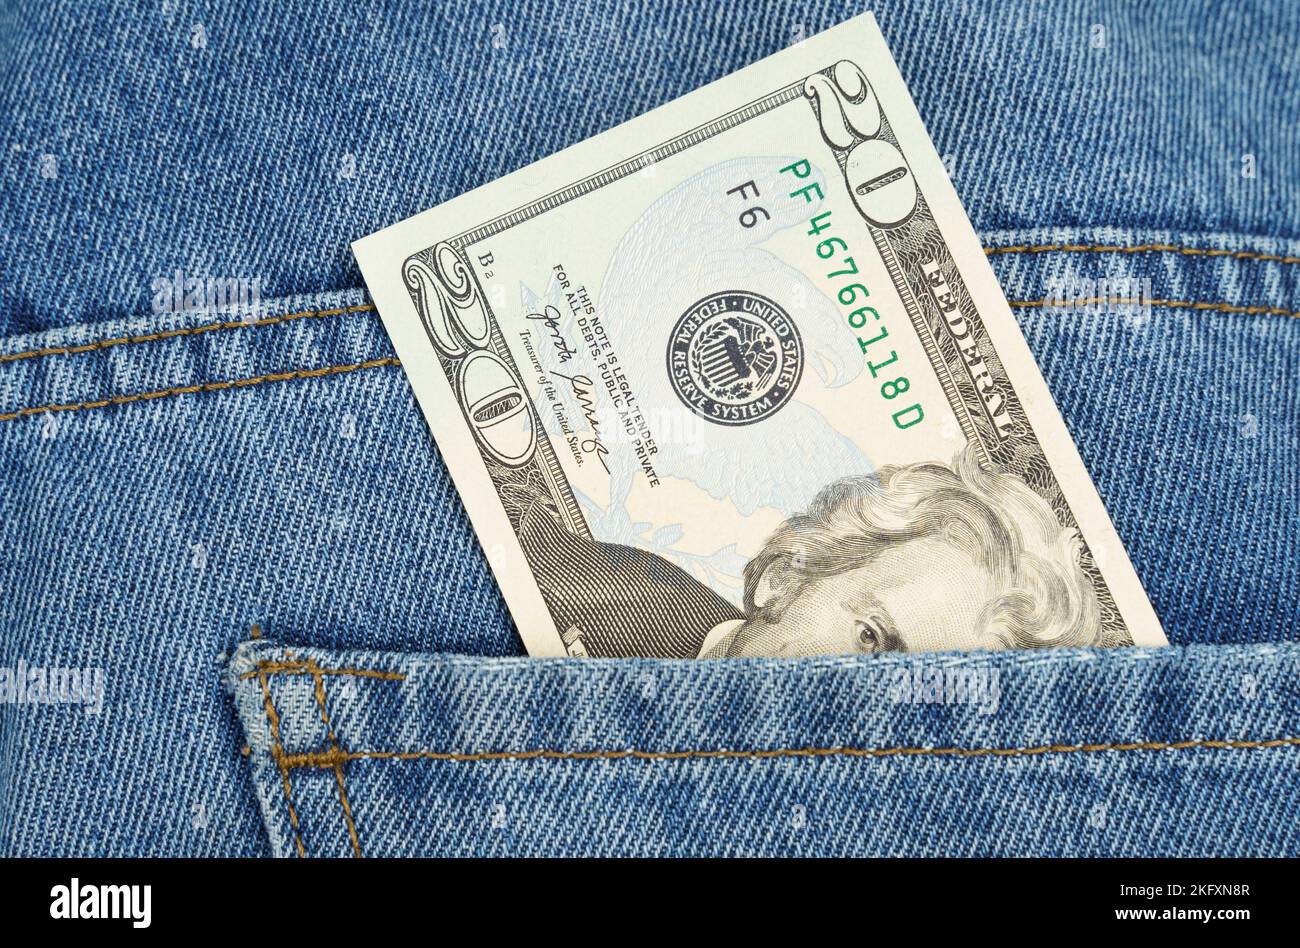 Business and finance concept. There's a twenty dollar bill in my jeans pocket. Stock Photo